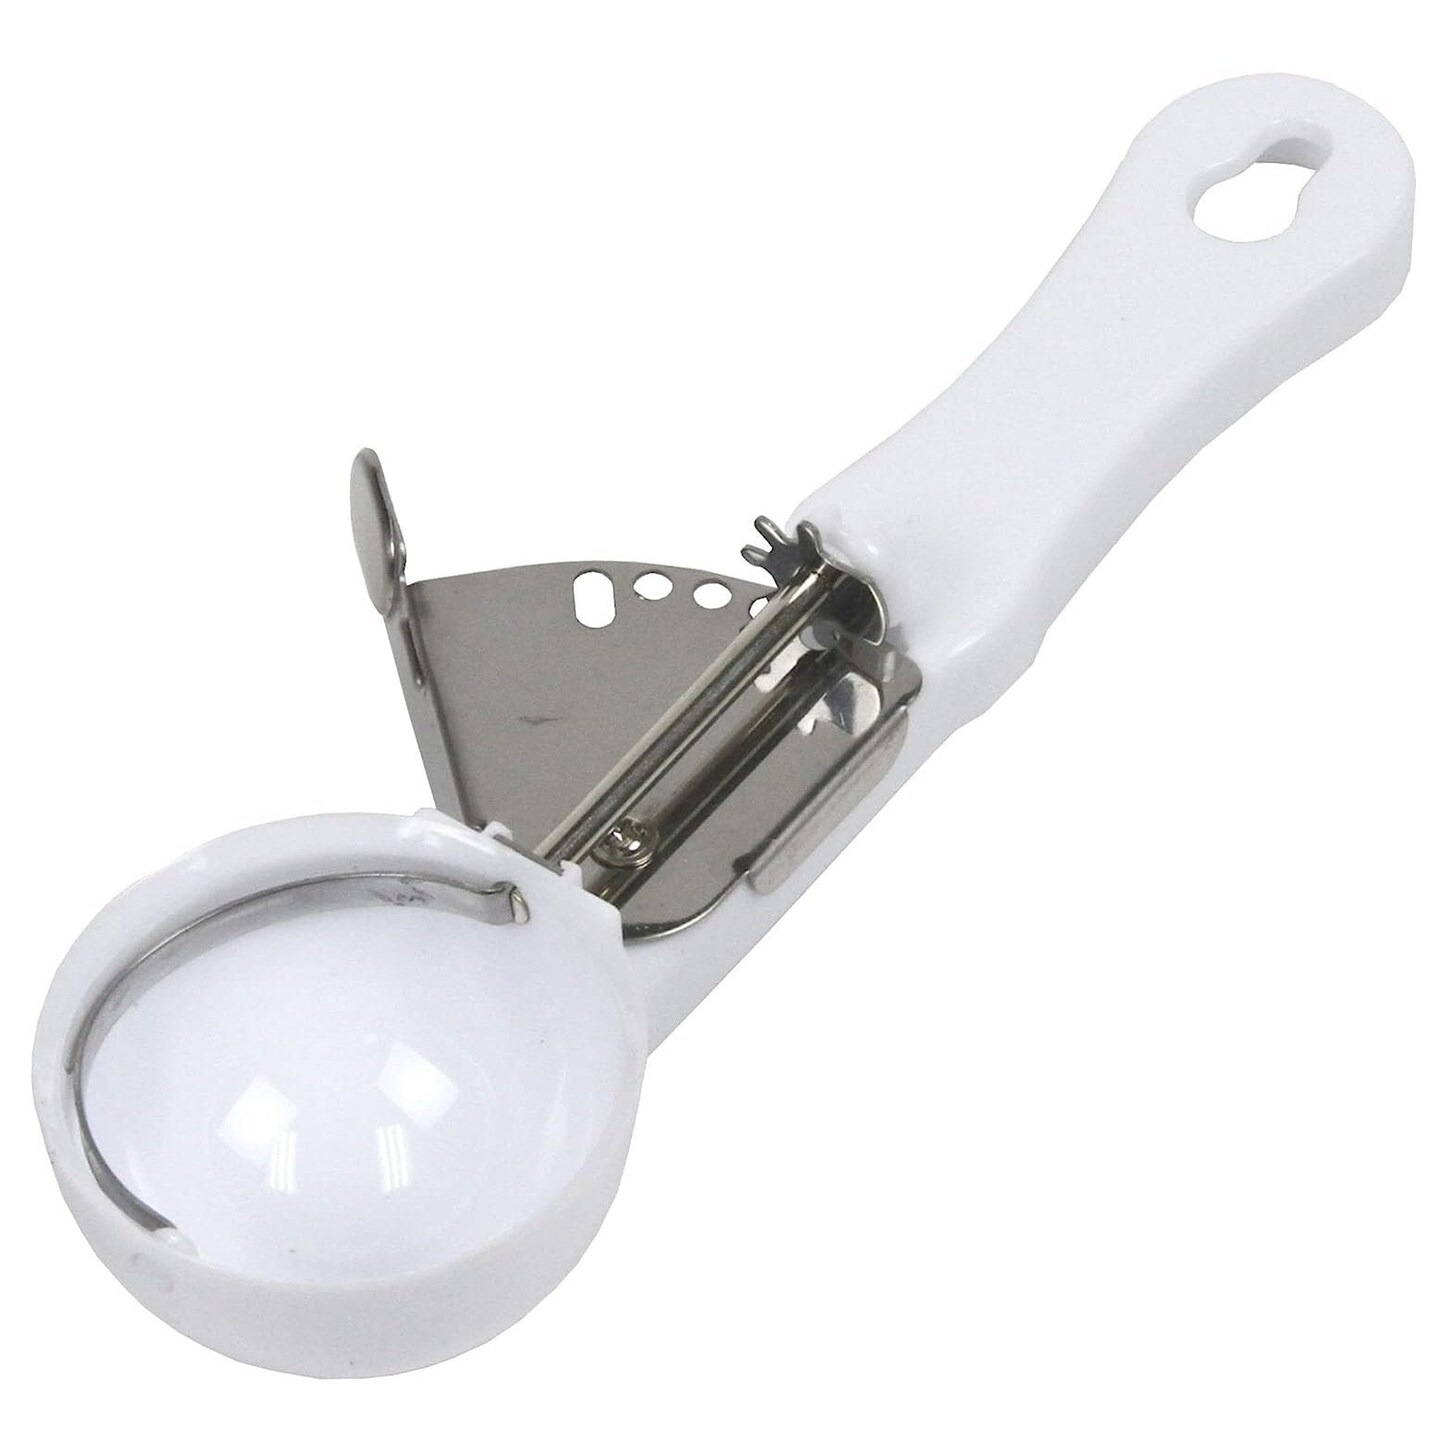  Spring Chef - Cookie Scoop with Trigger Release